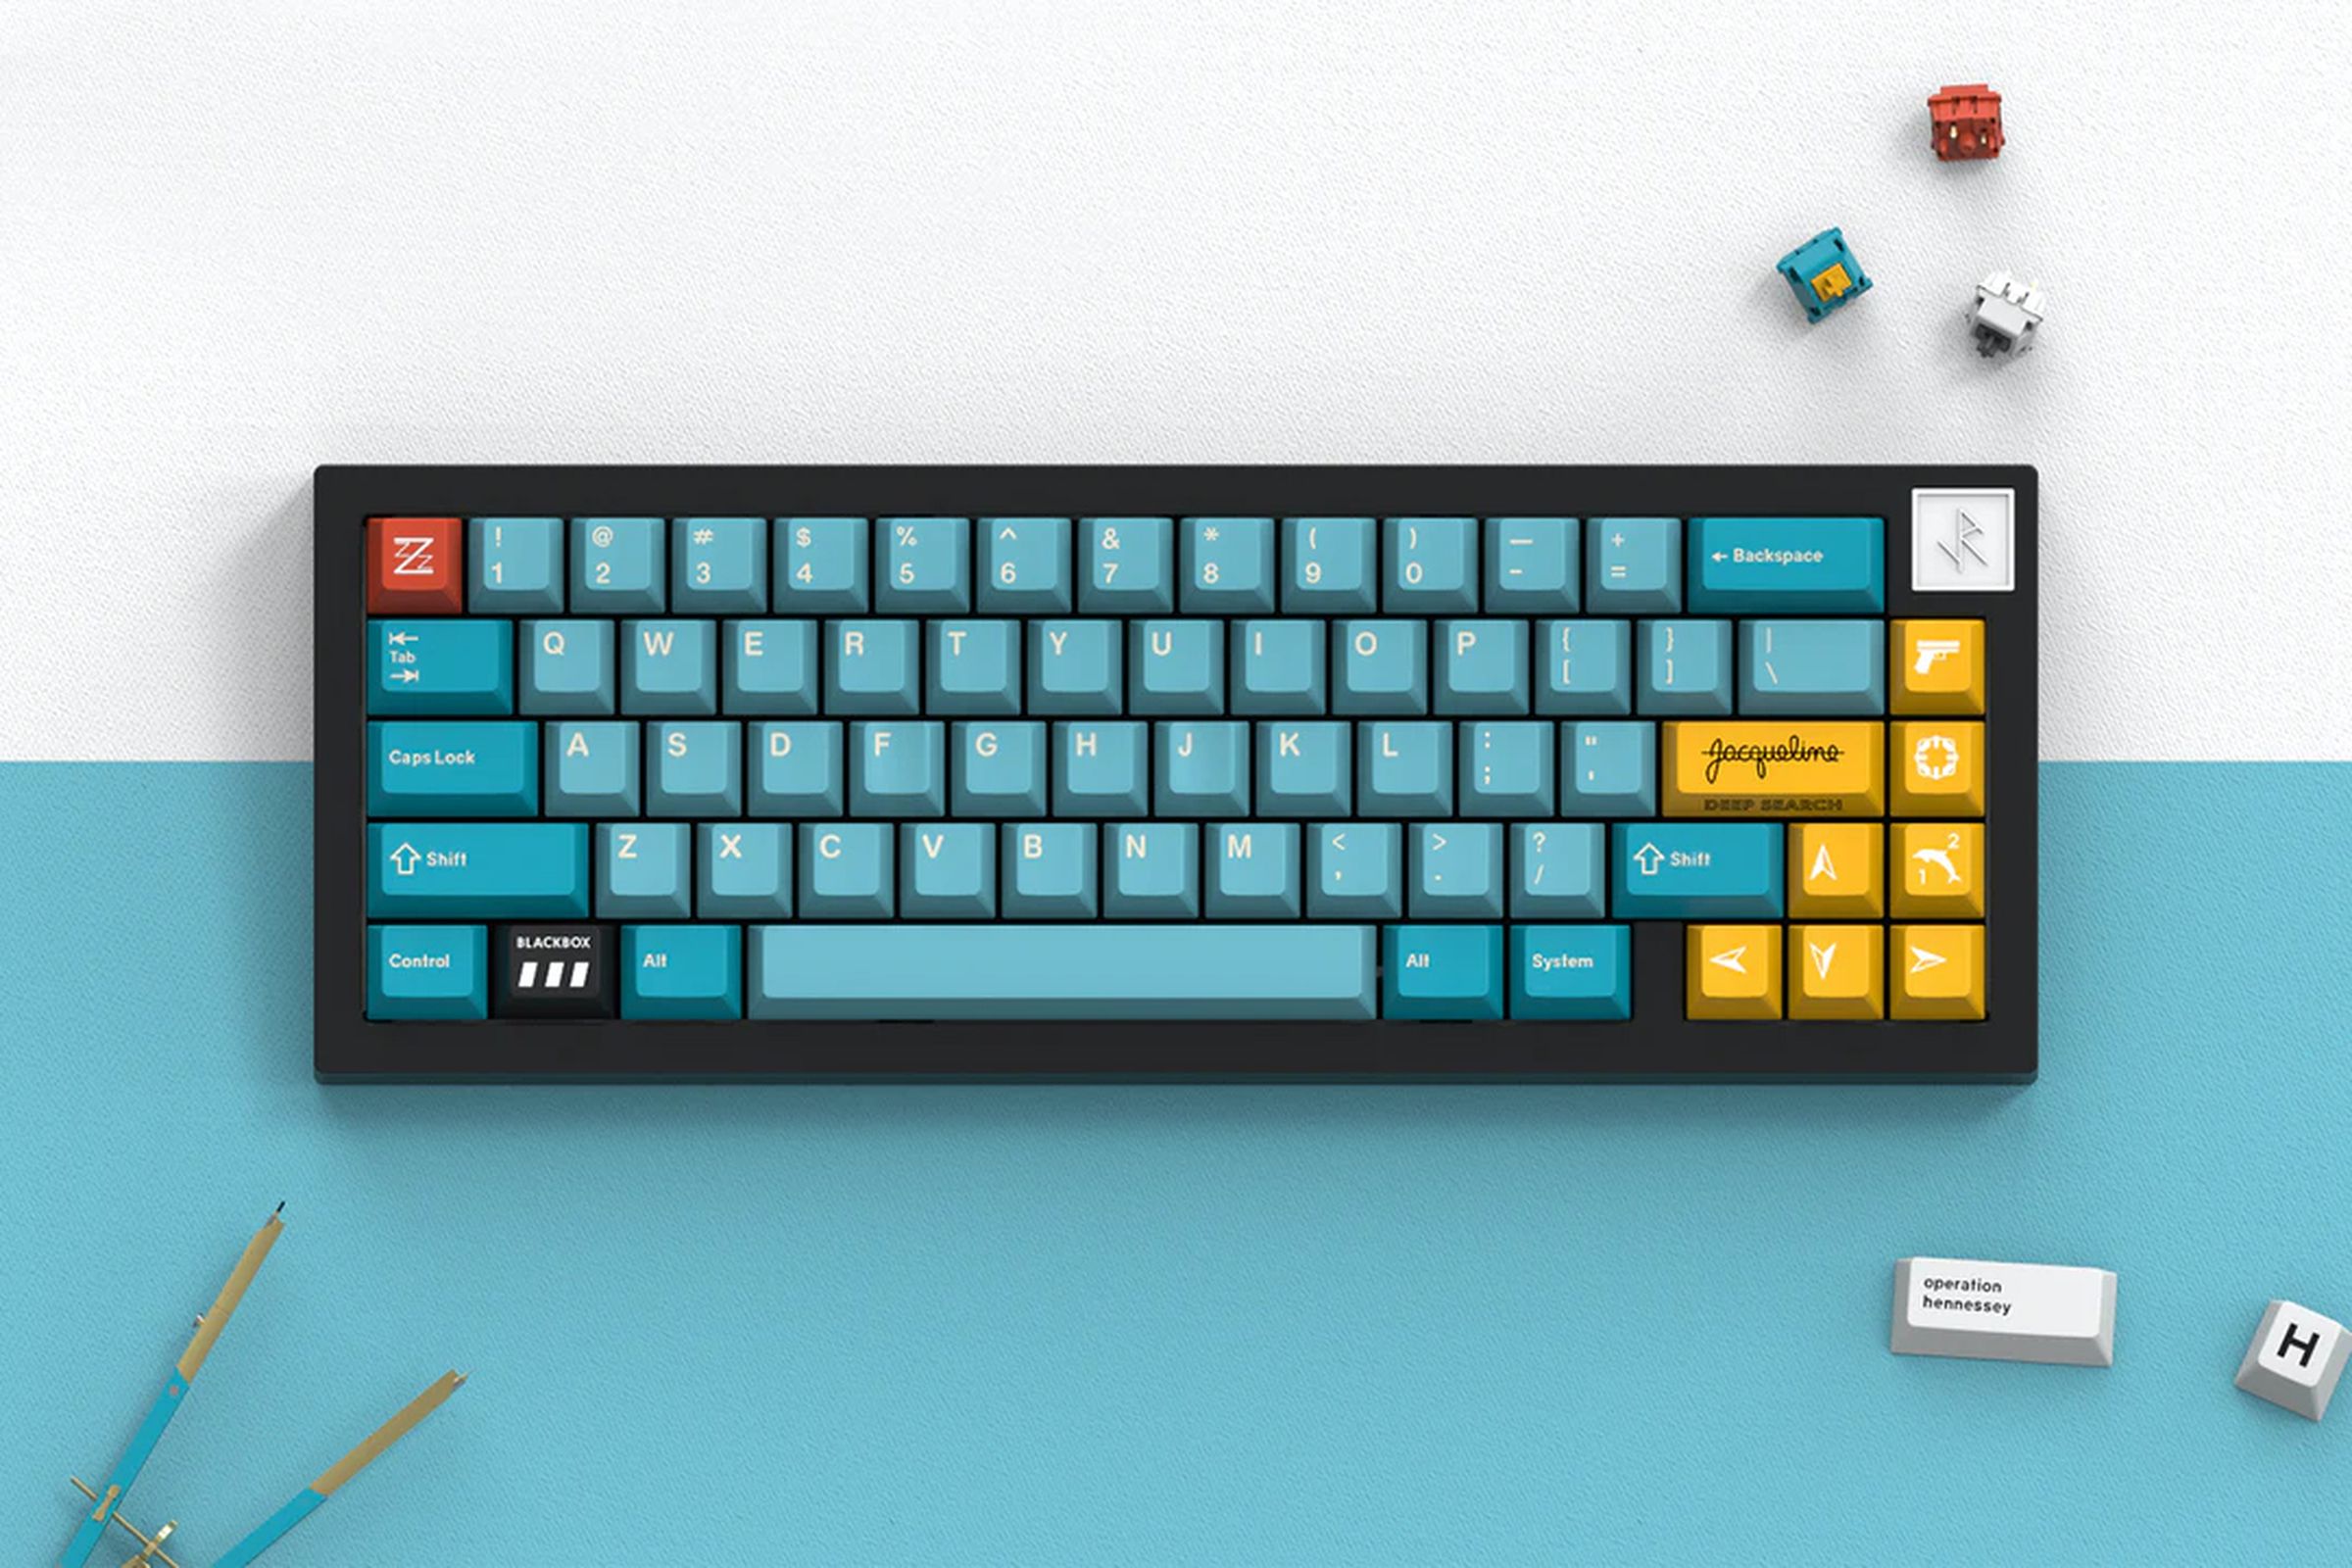 Nothing brings the cool factor to mechanical keyboards quite like colorful keycaps.